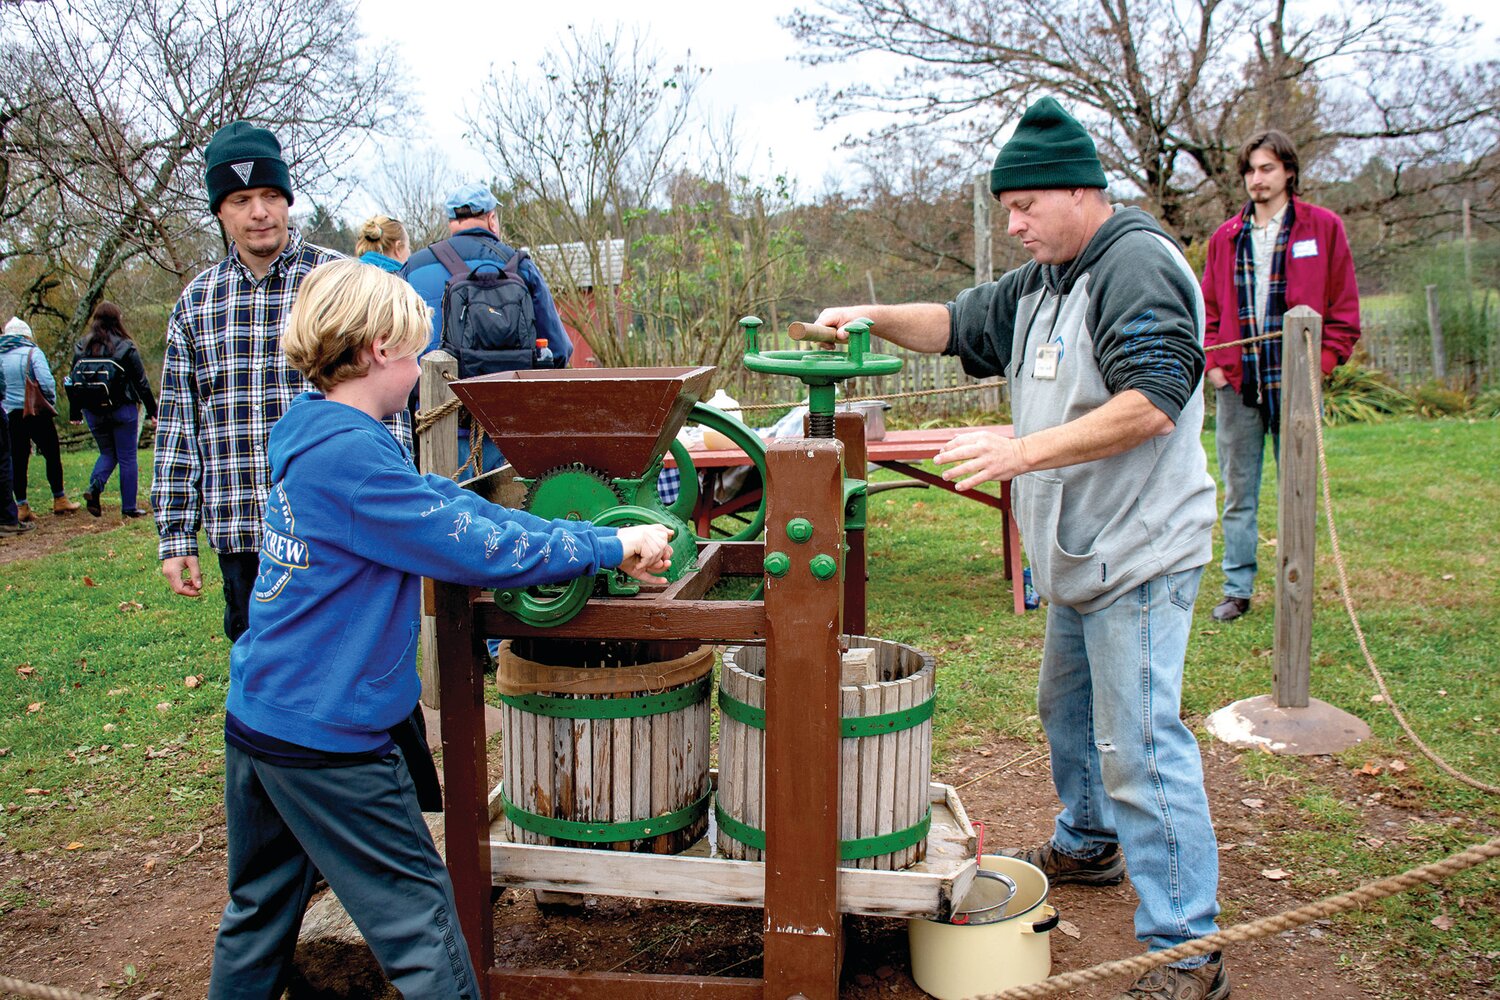 Visitors participate in the process of making apple cider at Howell Living History Farm.